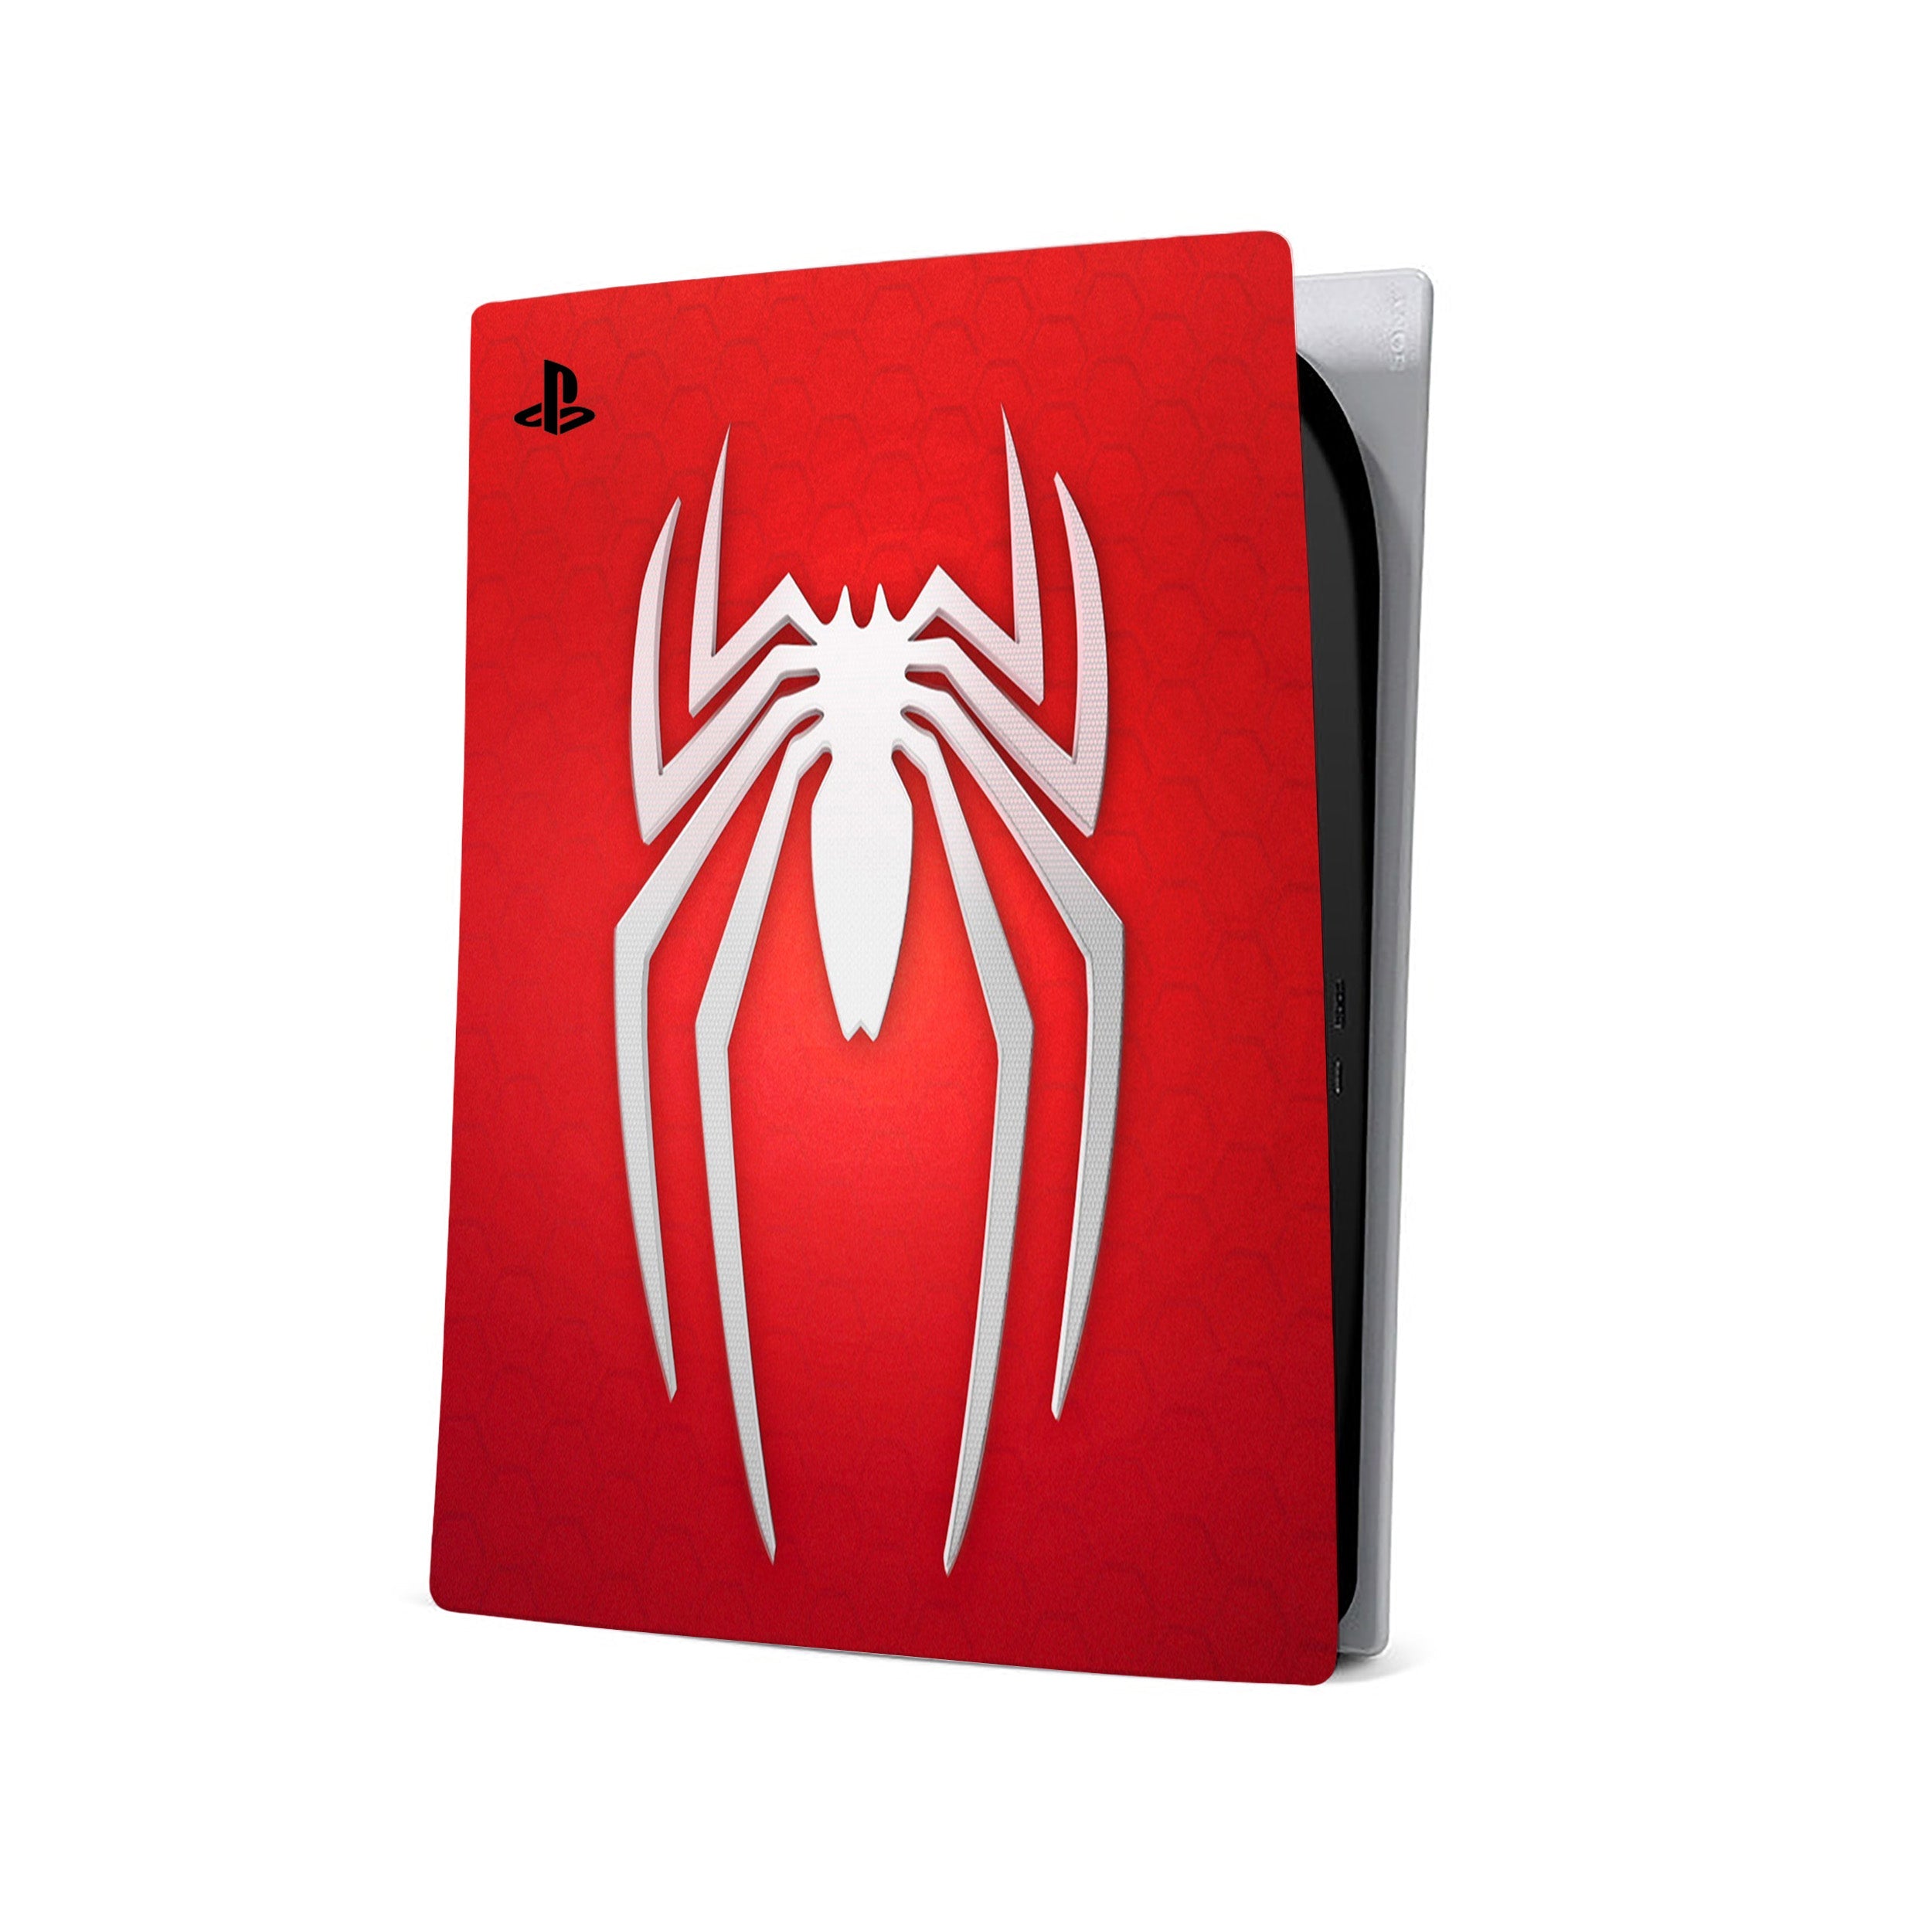 A video game skin featuring a Marvel Spiderman design for the PS5.